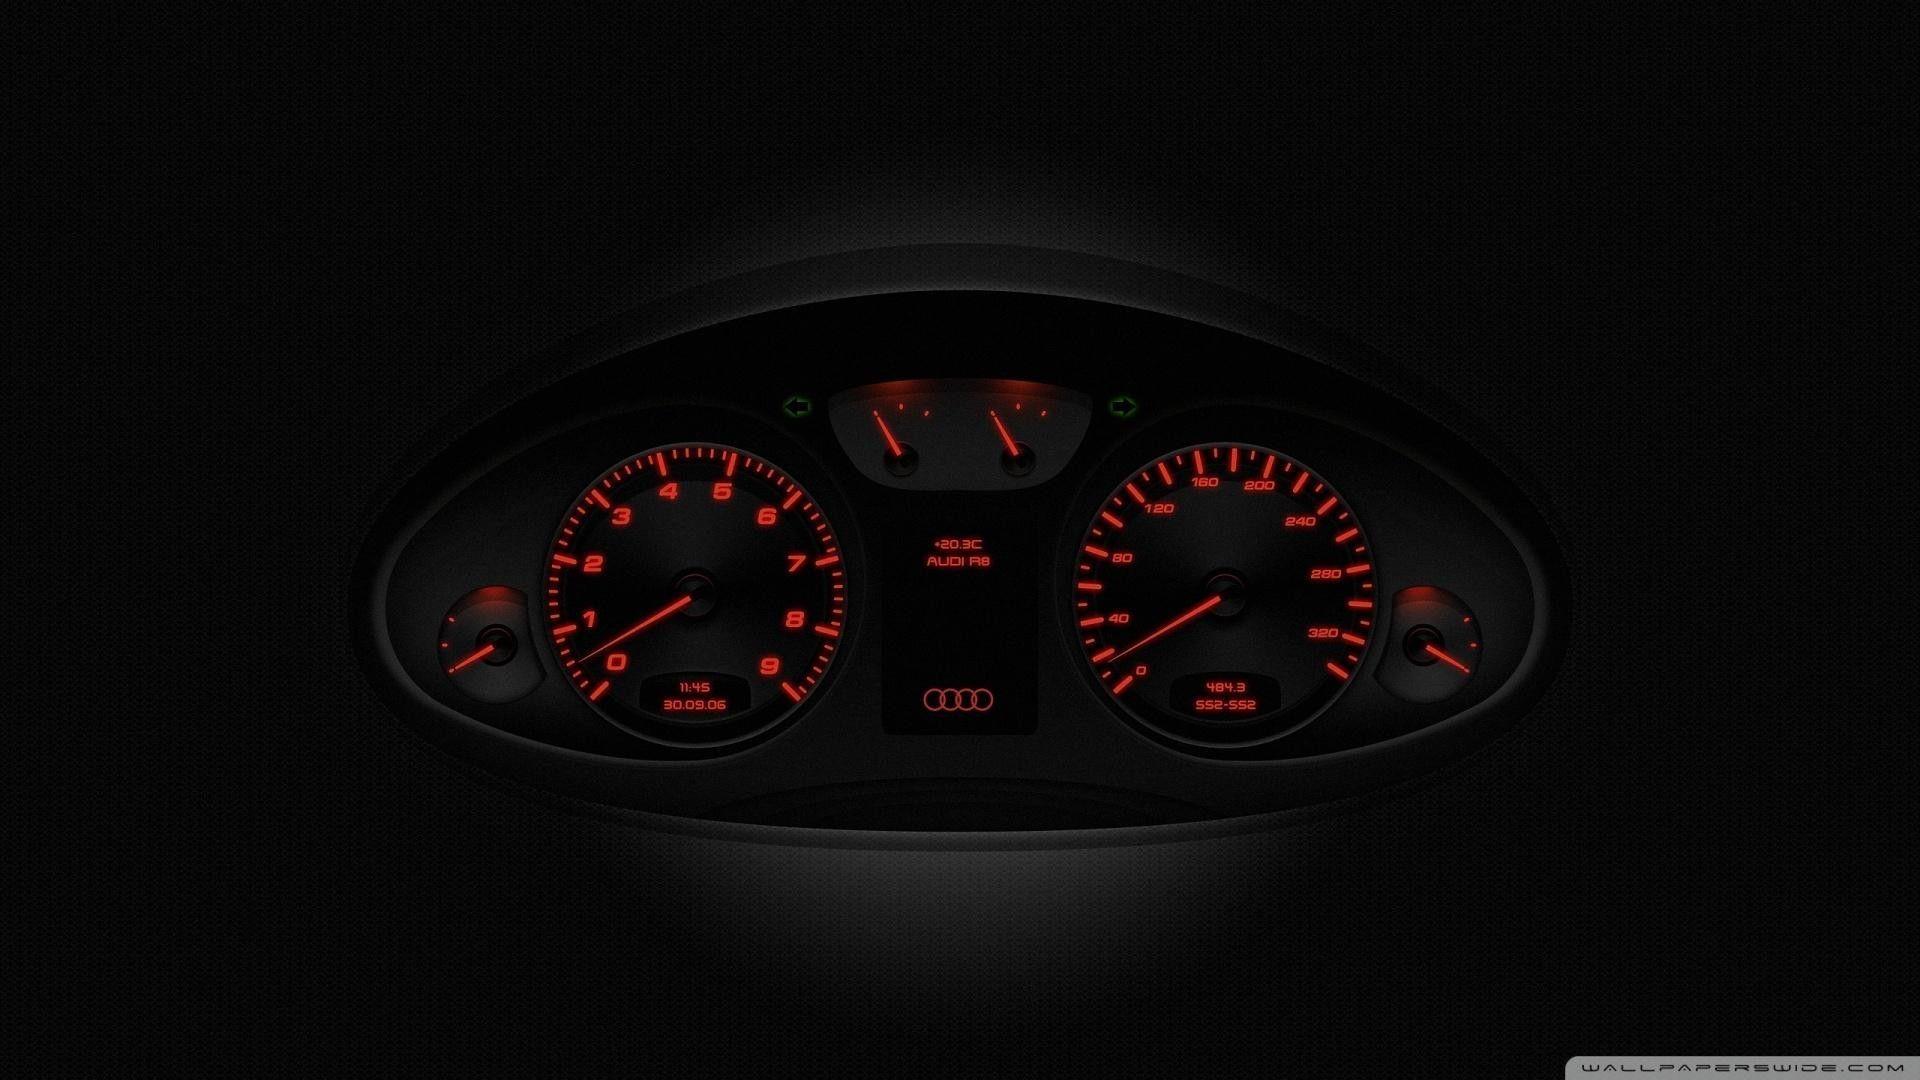 Vecteur Stock Realistic car dashboard speedometer and tachometer. Speed  measure gauge. Motorbike or motorcycle speed indicator, counter on analog  panel. Colorful infographic element | Adobe Stock